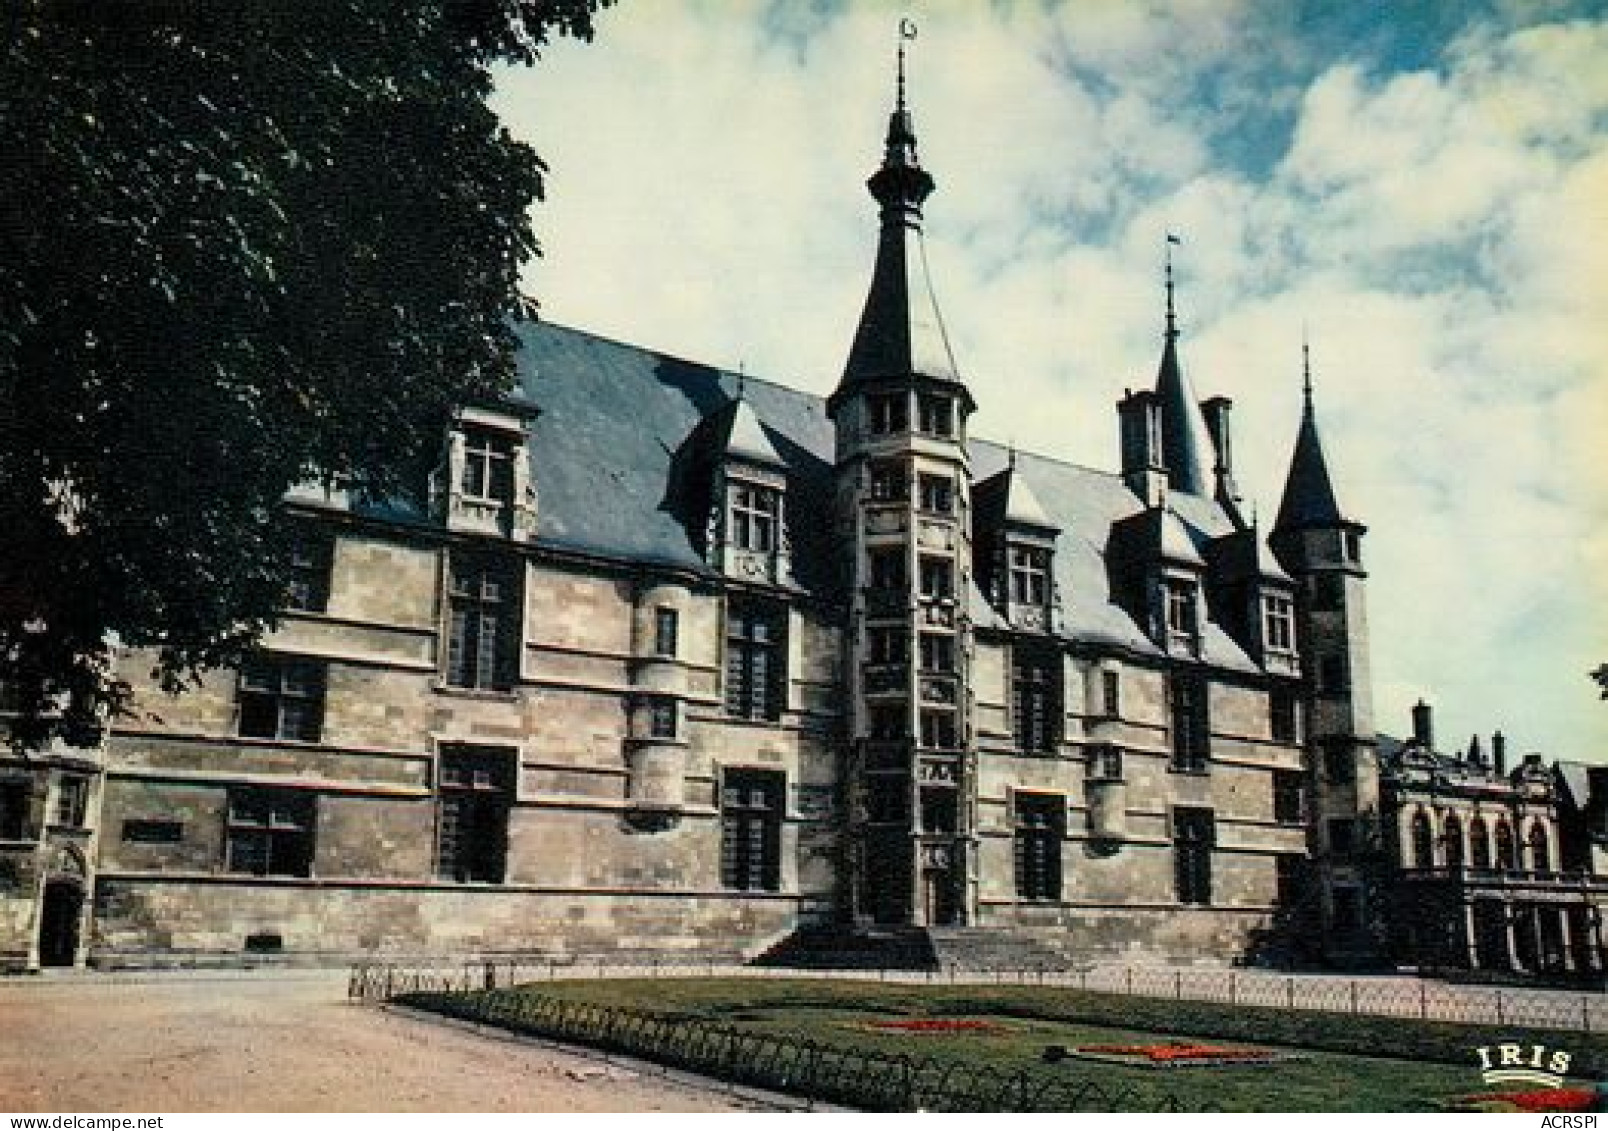  NEVERS  Palais Ducale Et Theatre  18   (scan Recto-verso)MA2066Bis - Nevers